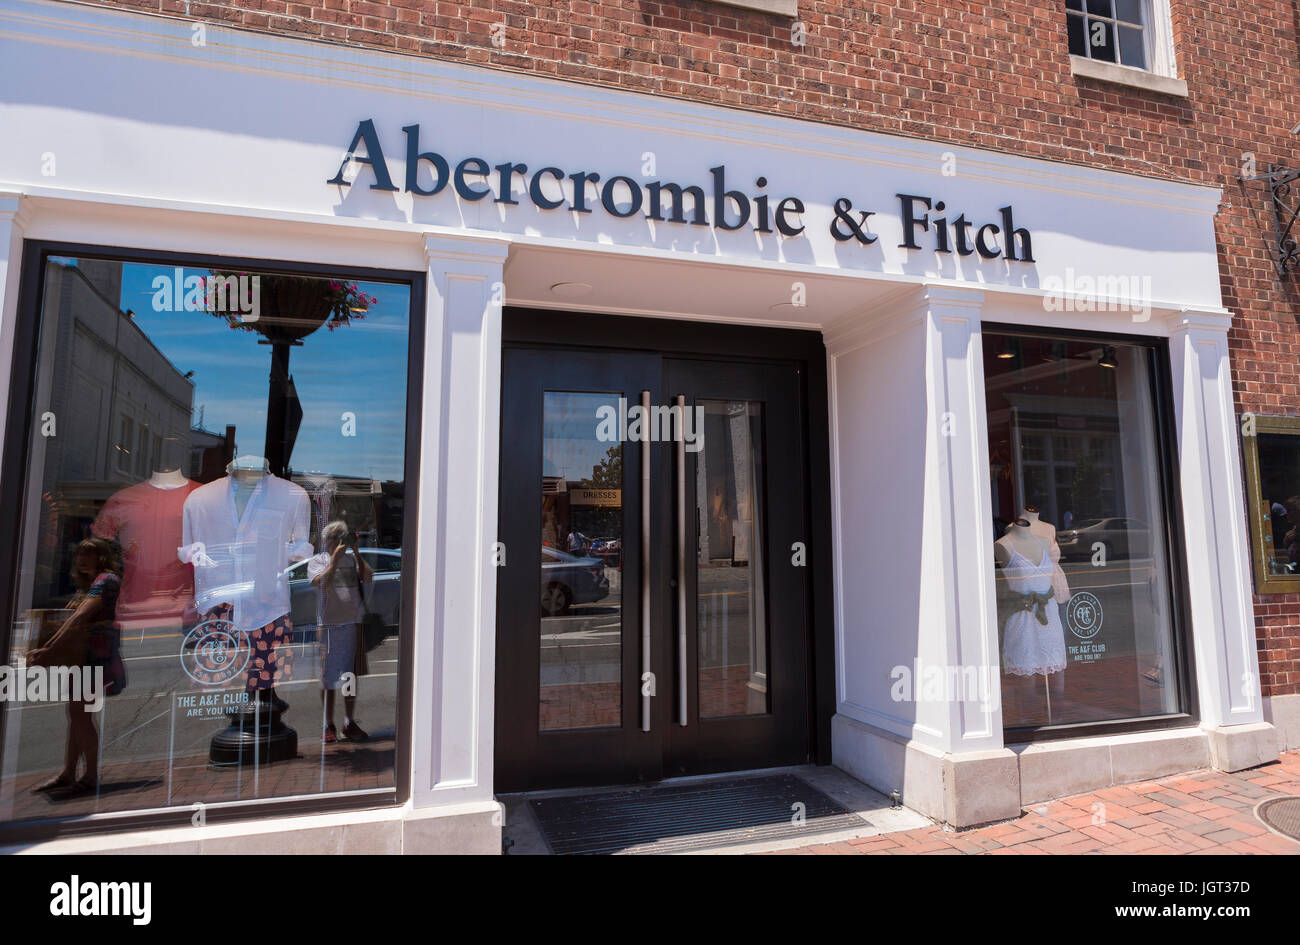 WASHINGTON, DC, USA - Abercrombie & Fitch retail store front in Georgetown. Stock Photo